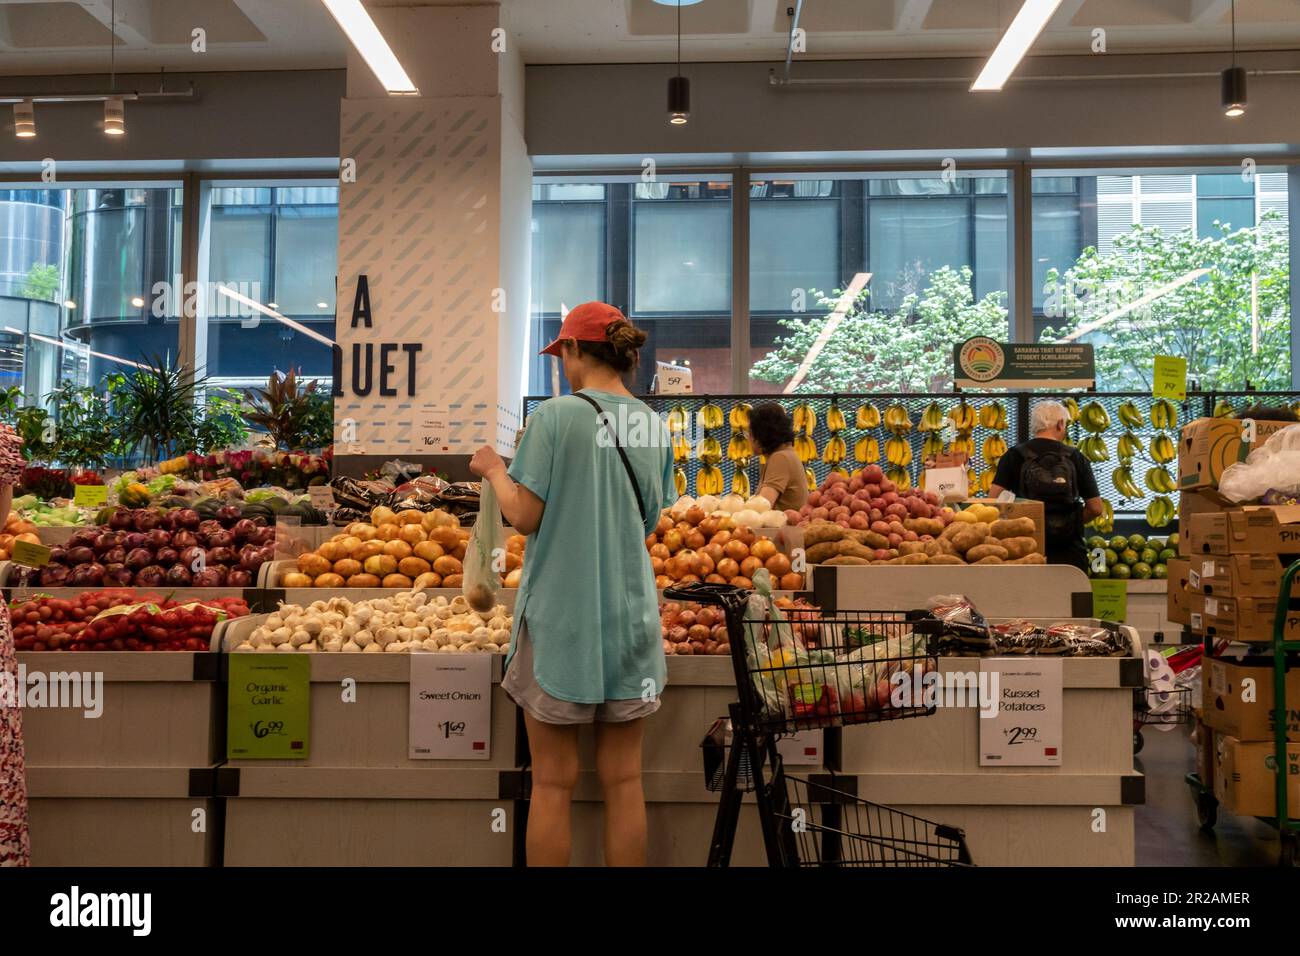 Fruit sits on display inside a Whole Foods Market in New York